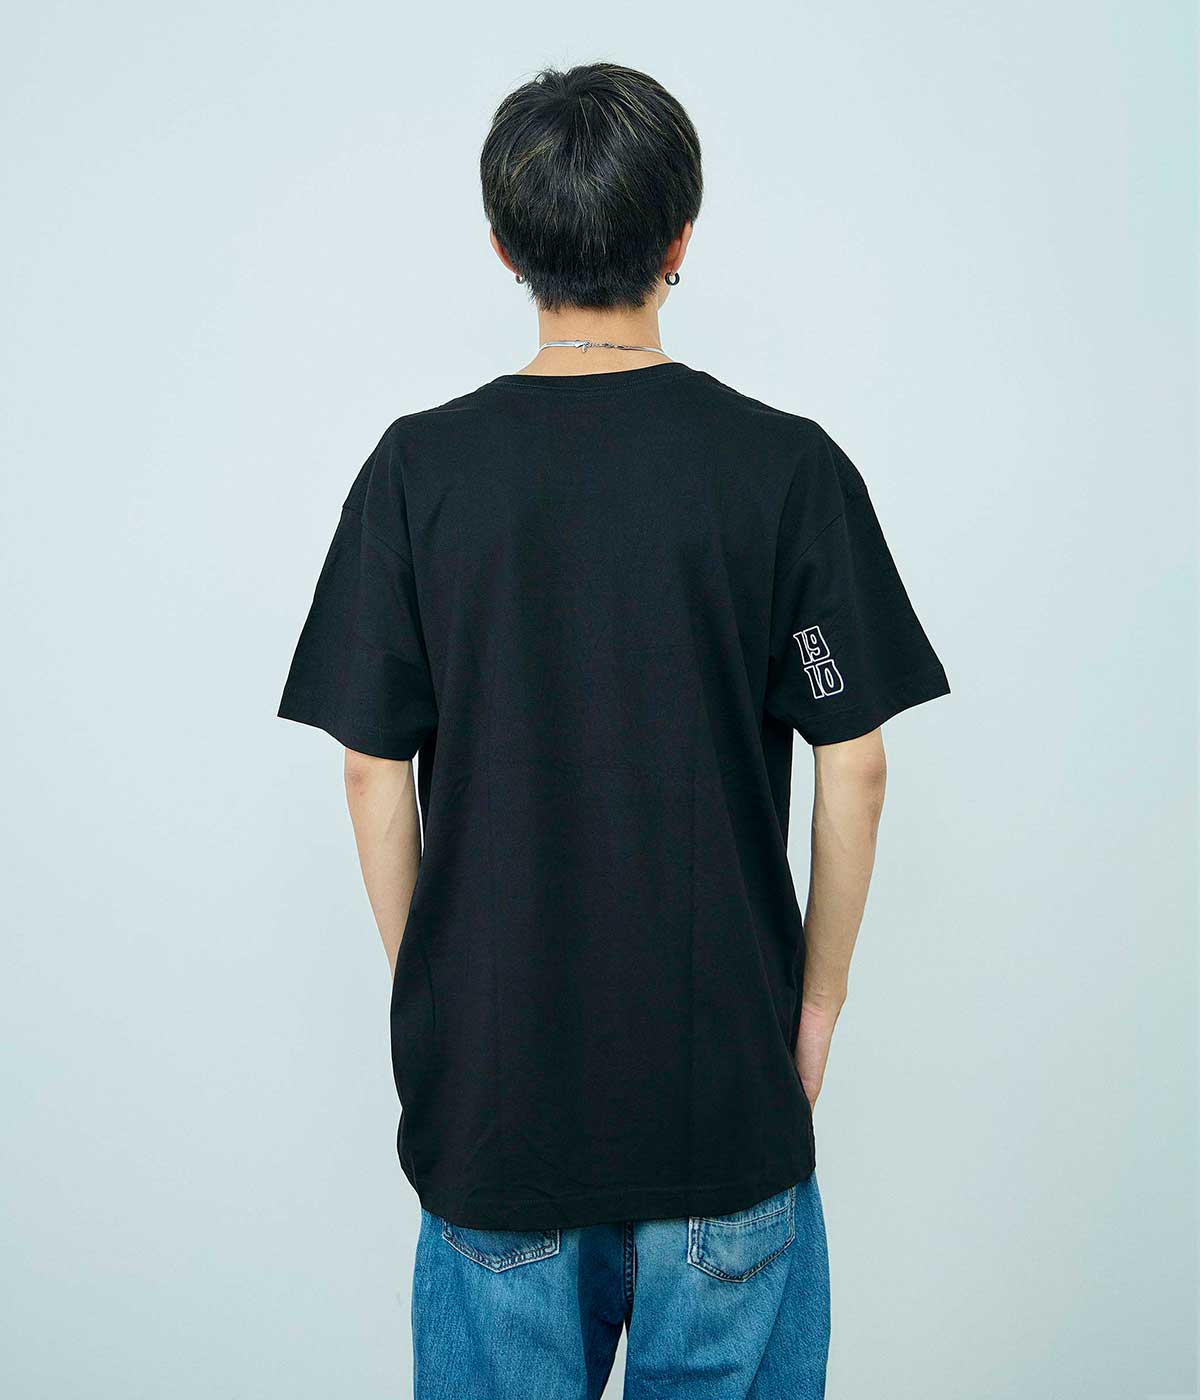 THE MUSE S/S // BLACK